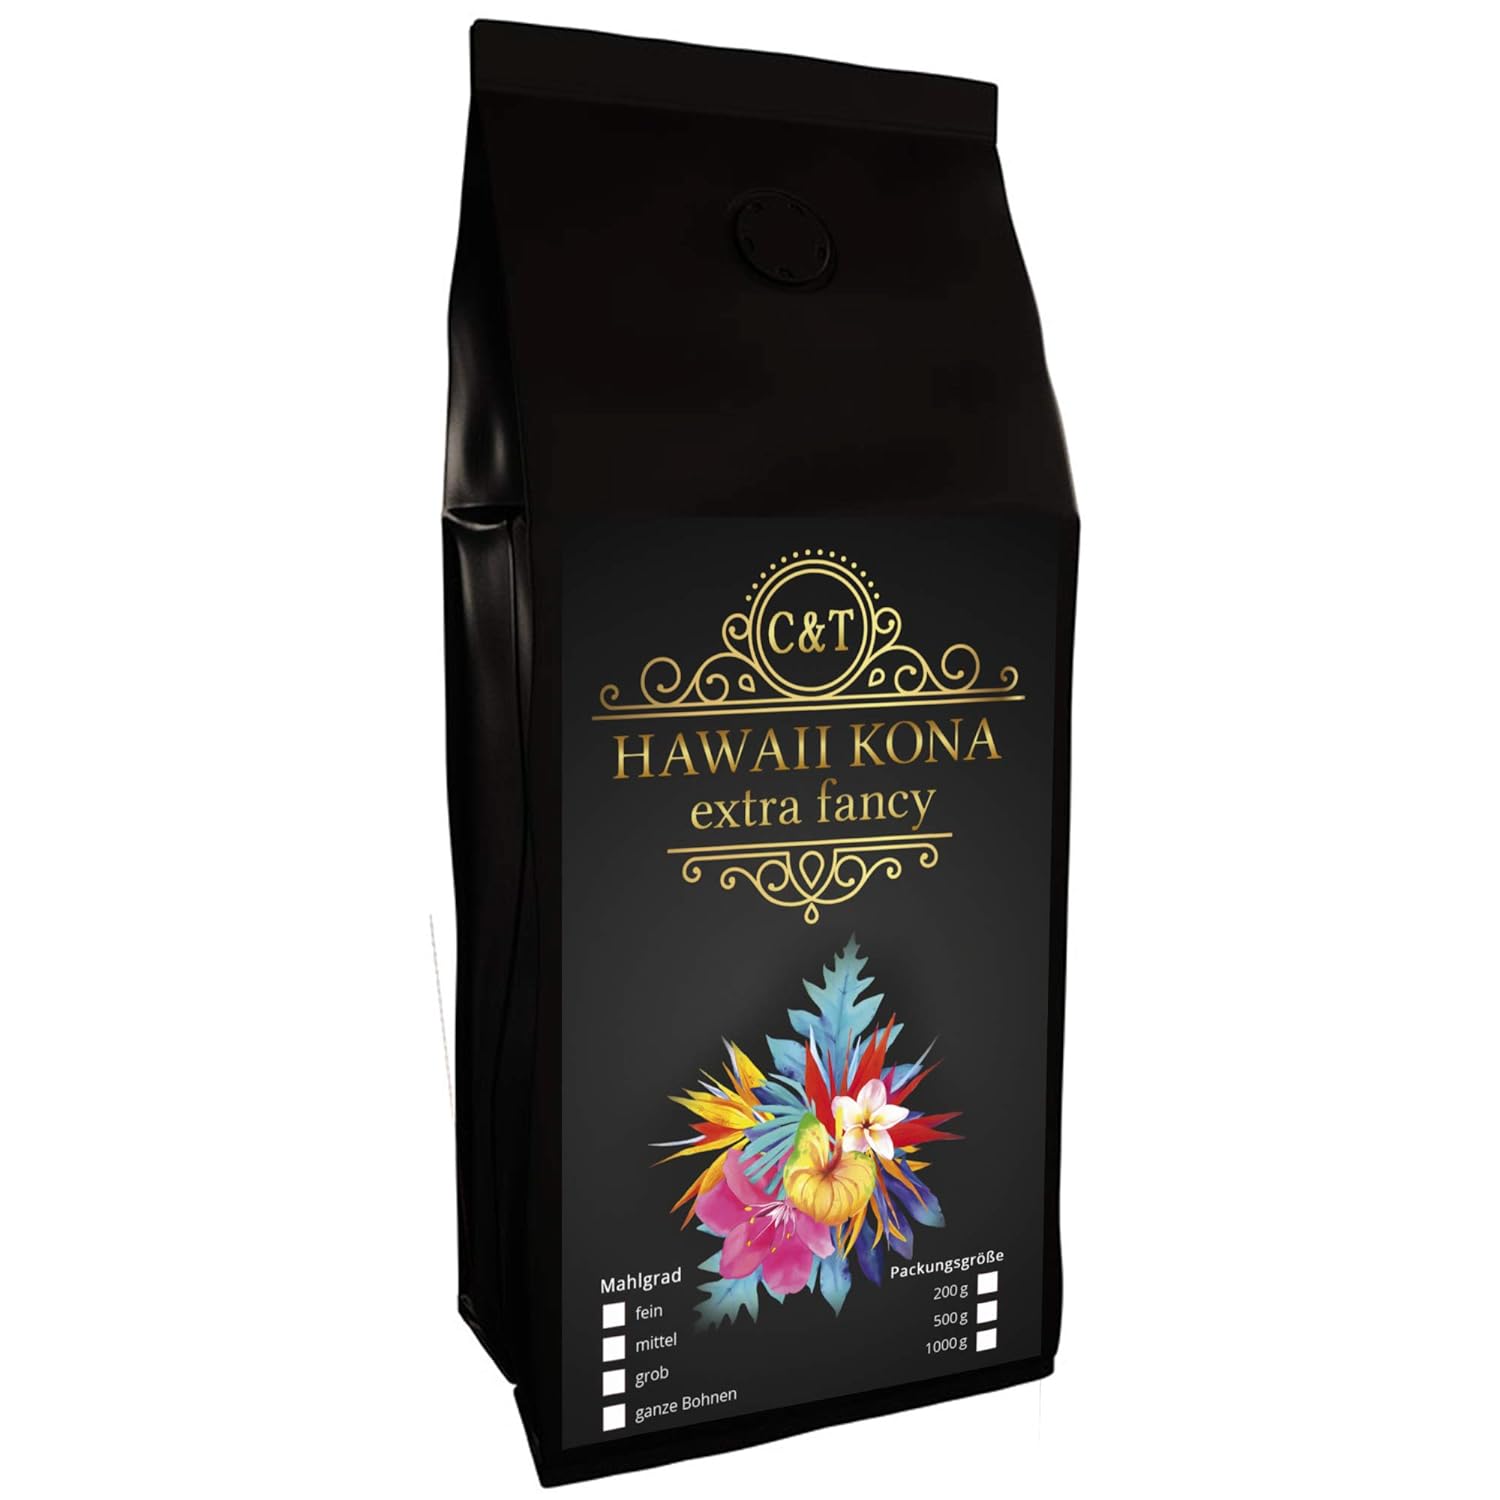 C&T Hawaii Kona coffee | 100g entire beans | The brown gold from Hawaii - one of the best coffees in the world